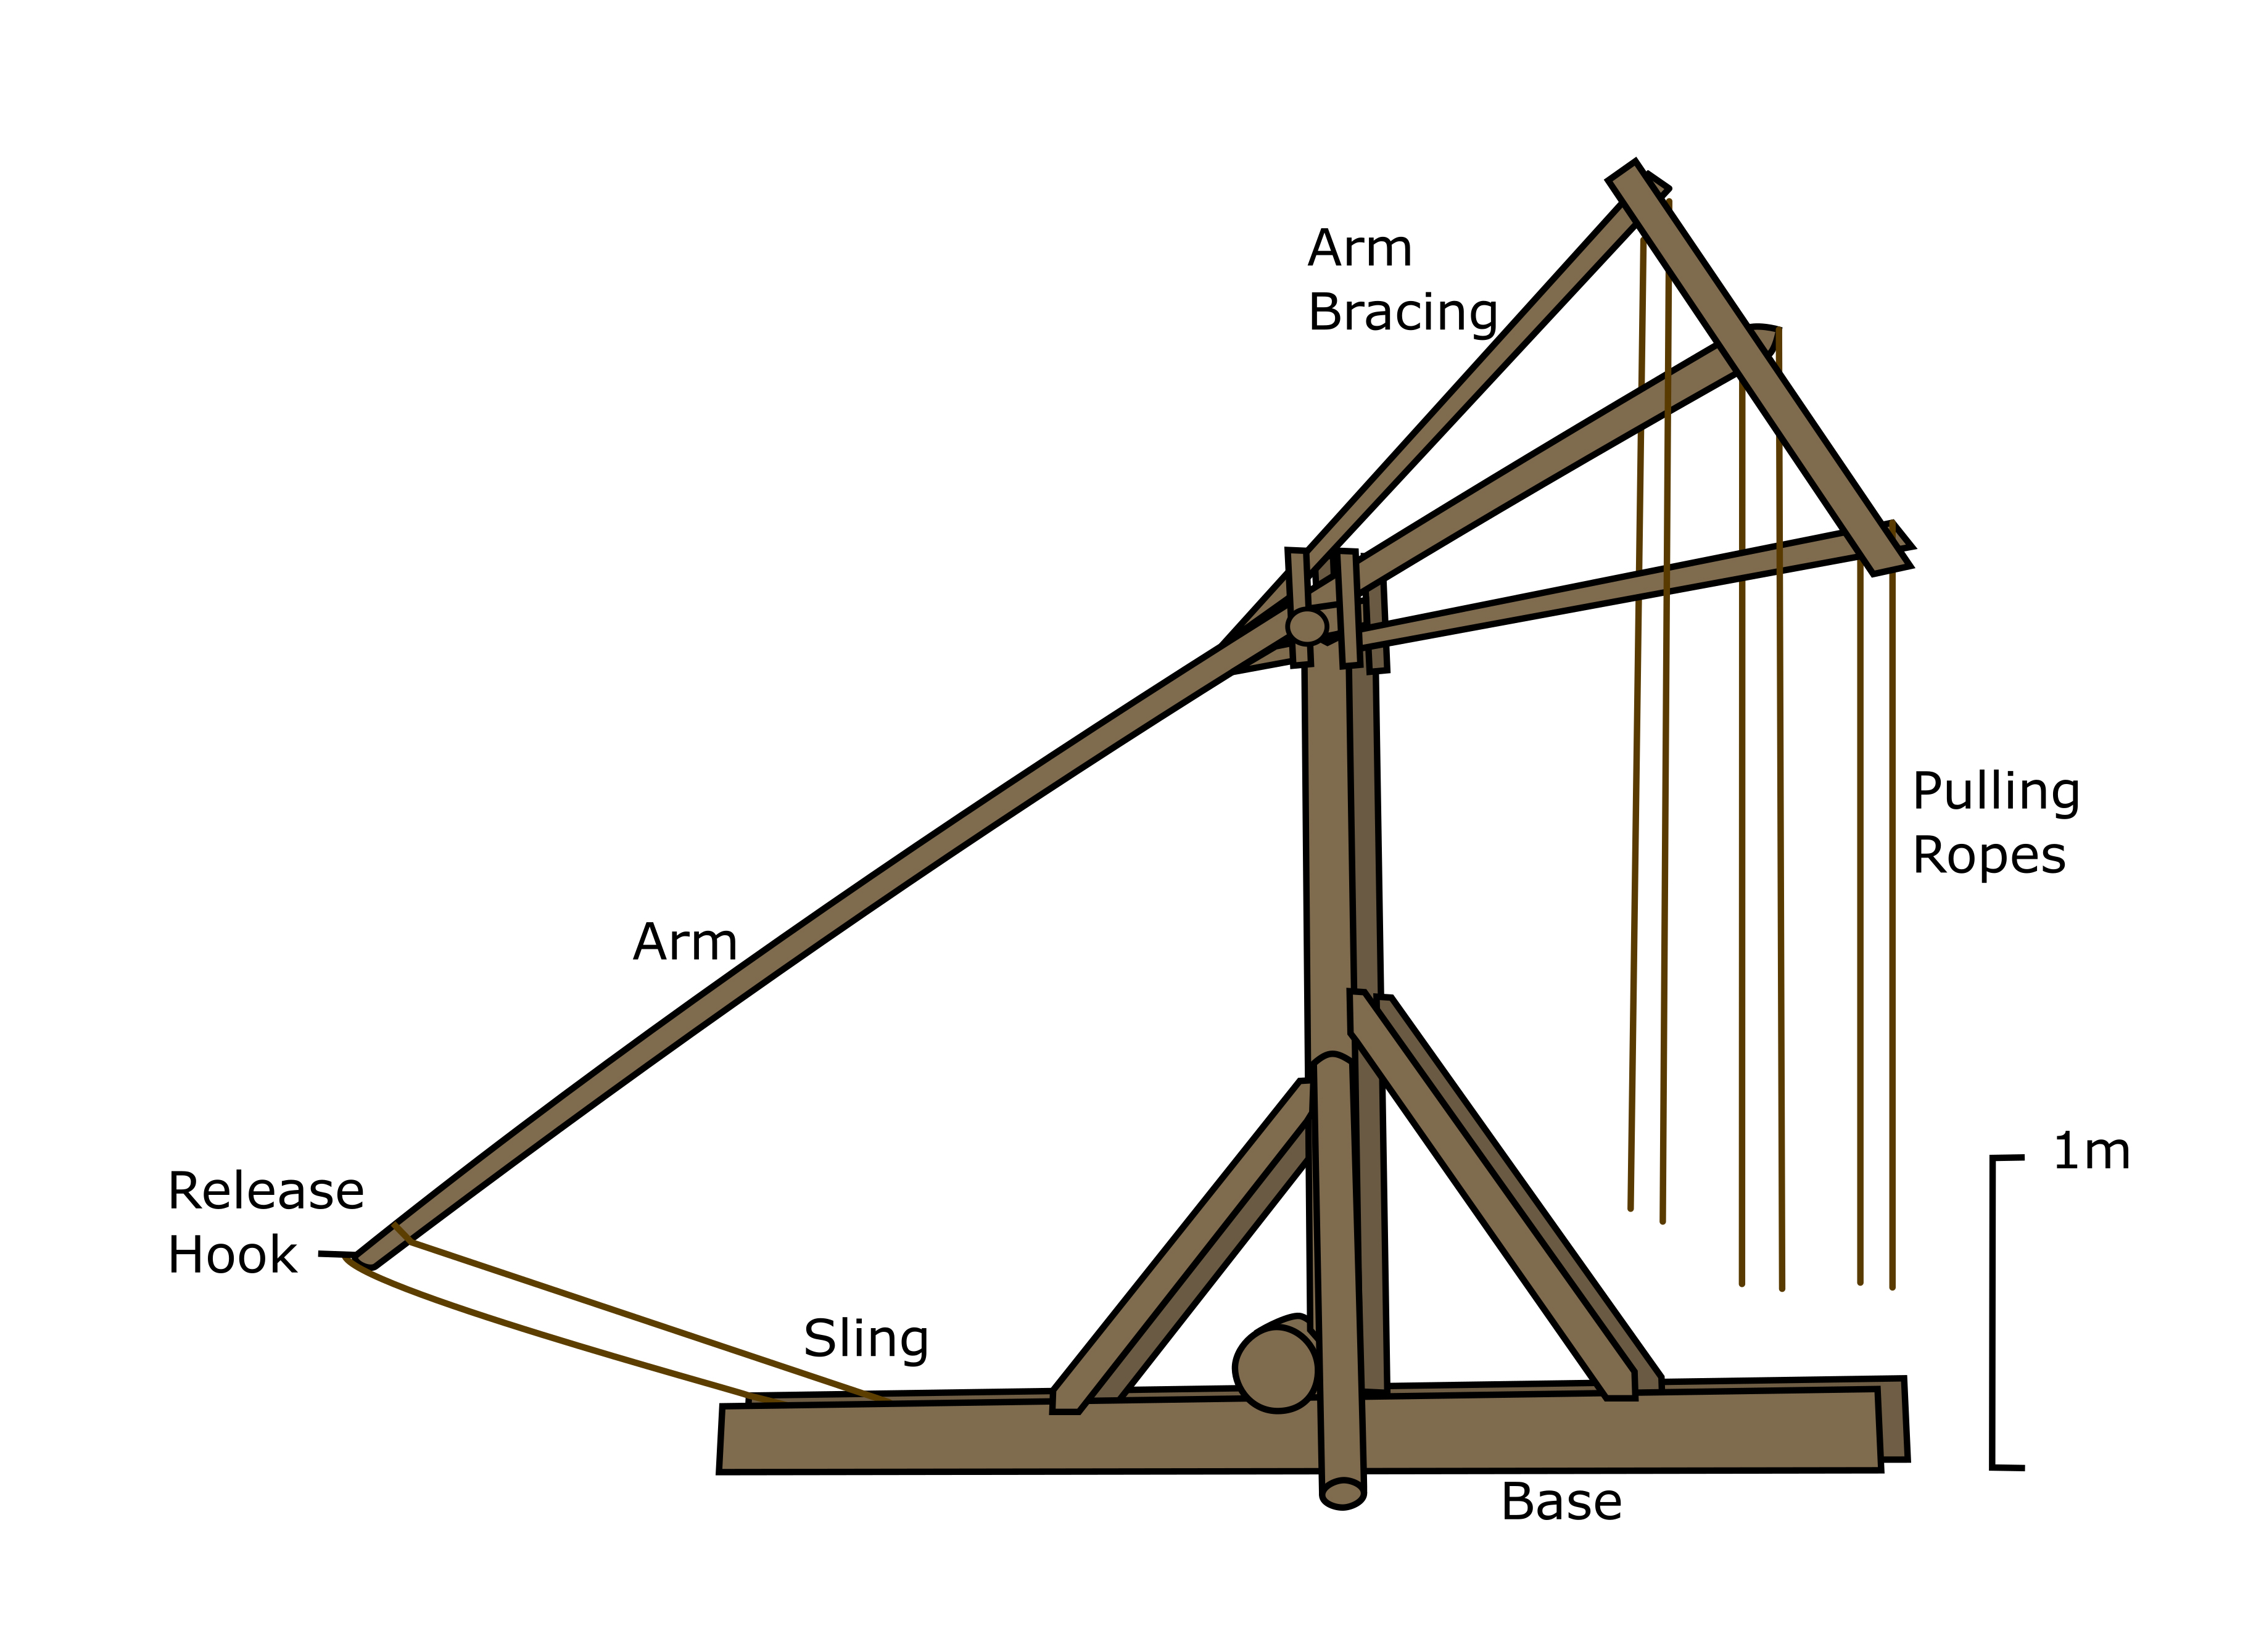 Labelled diagram of a traction trebuchet